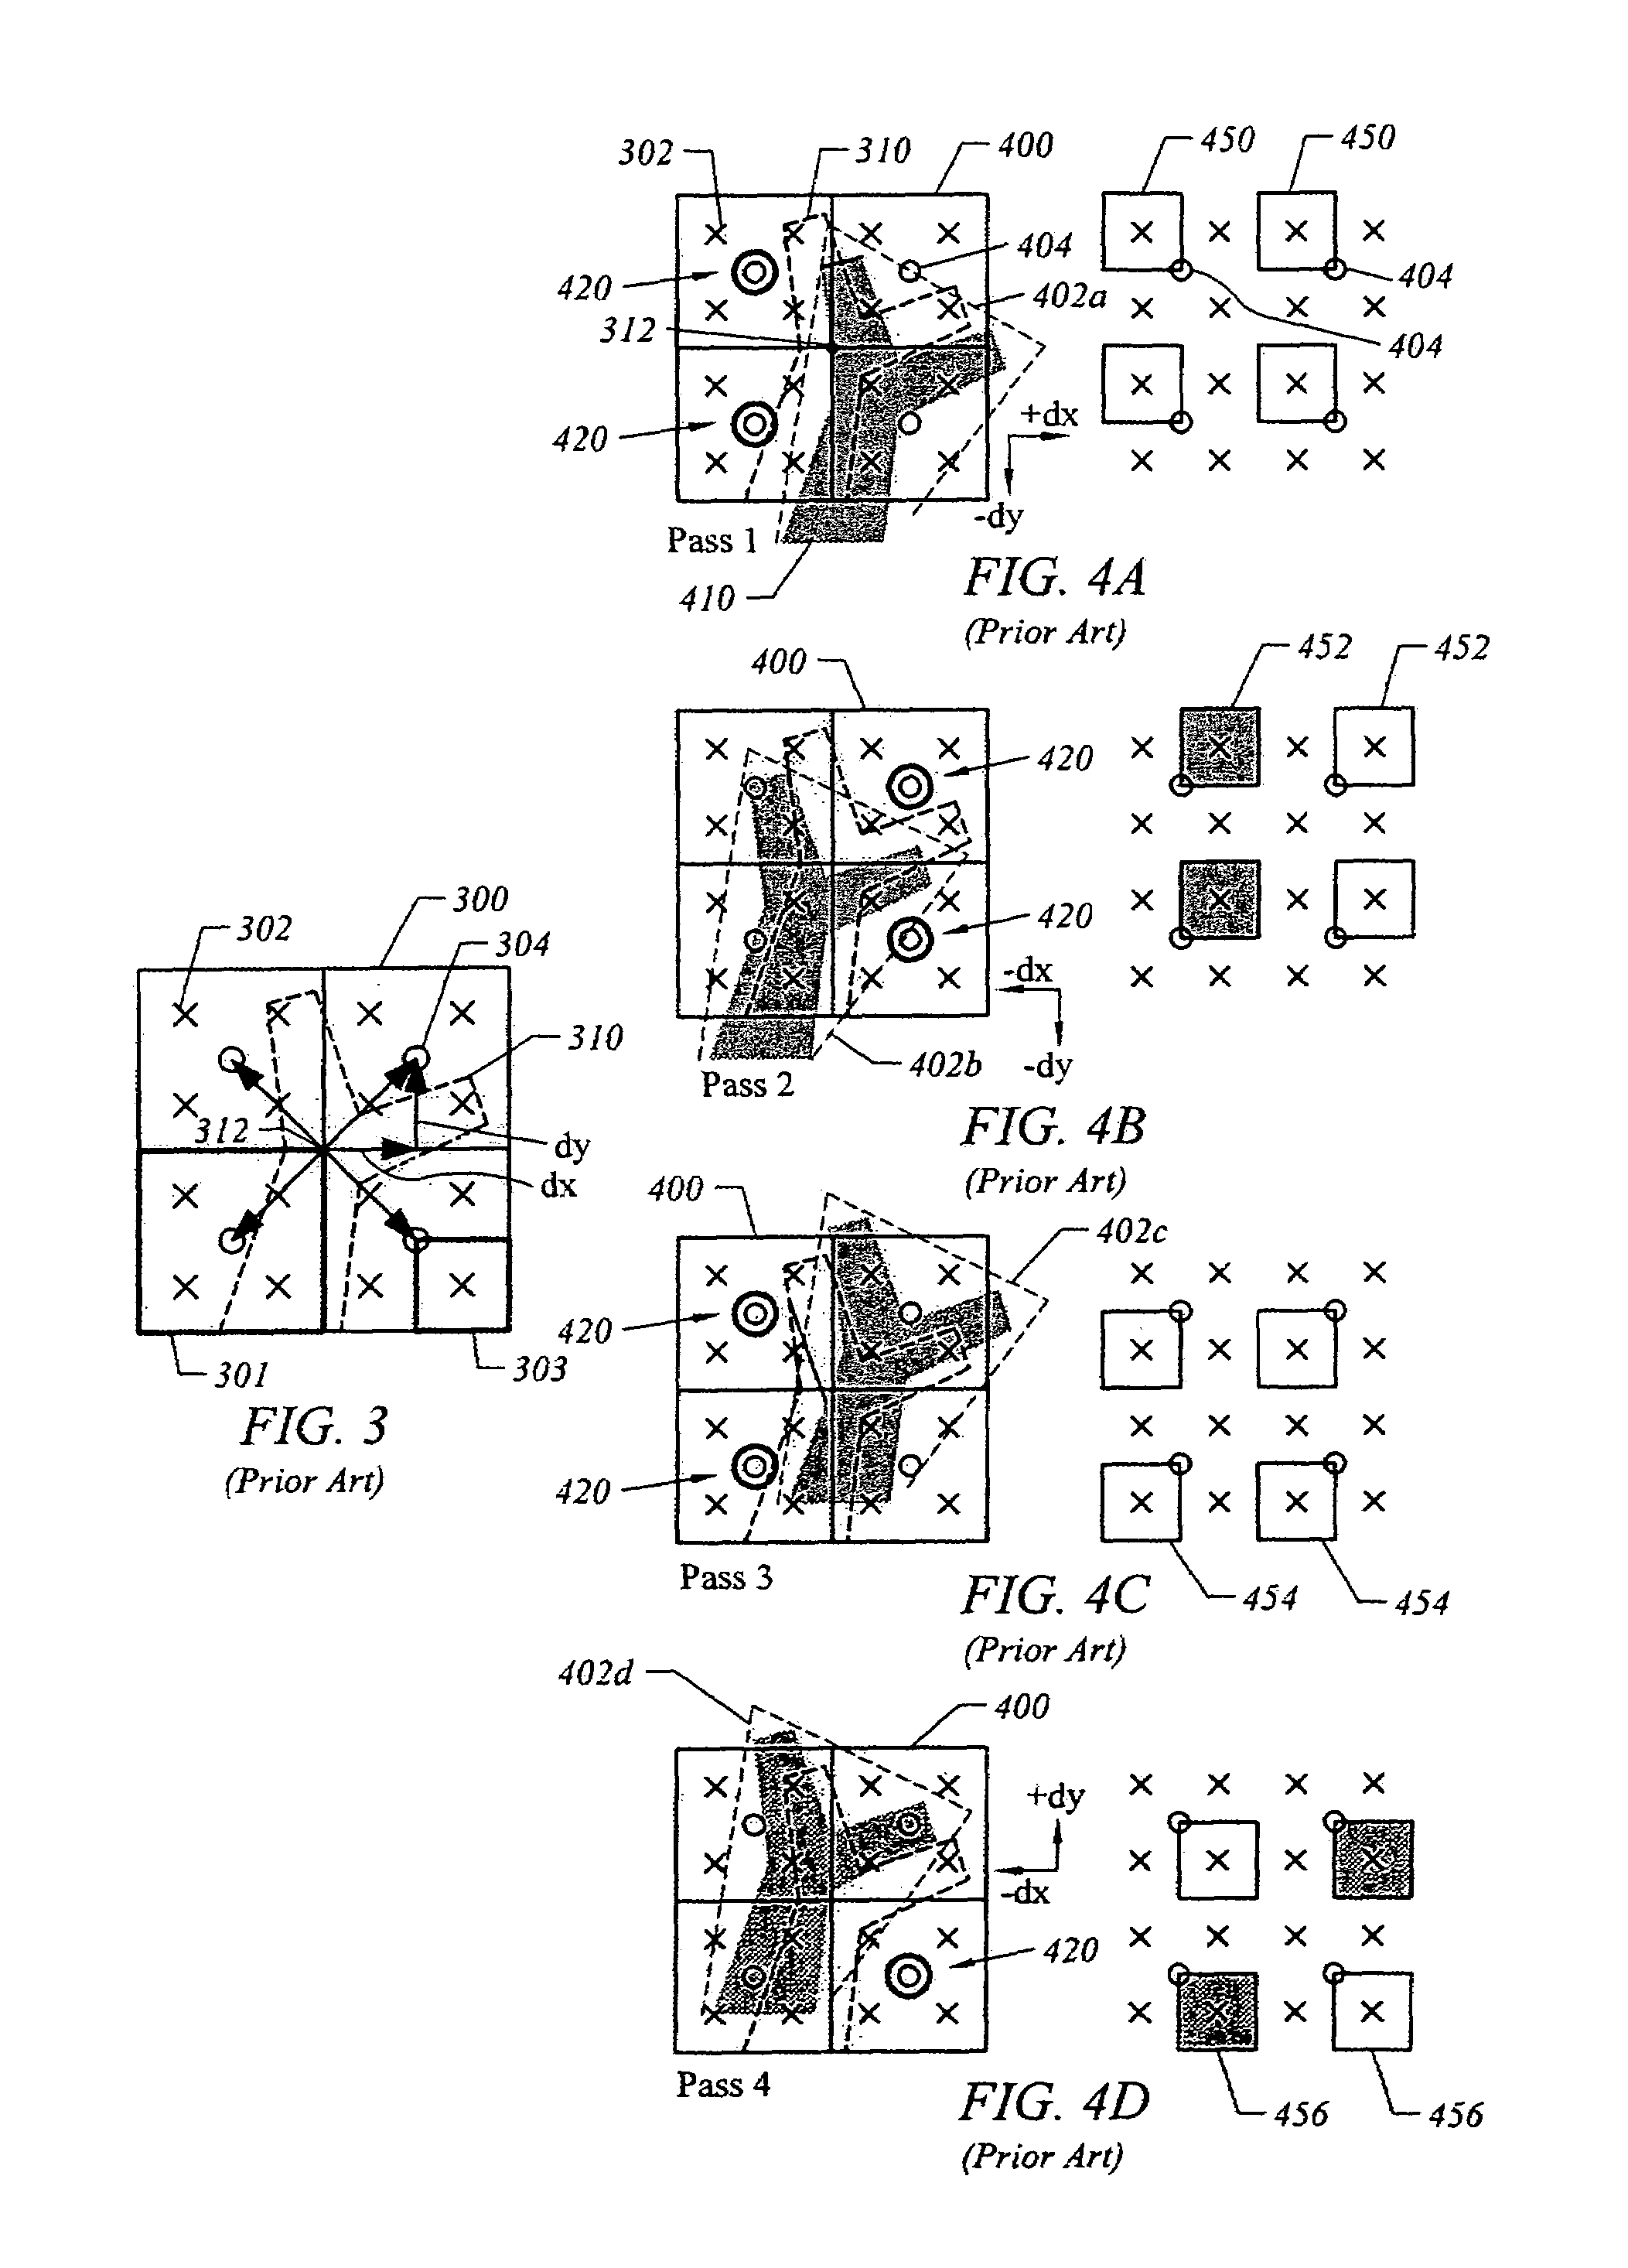 System, apparatus and method for subpixel shifting of sample positions to anti-alias computer-generated images